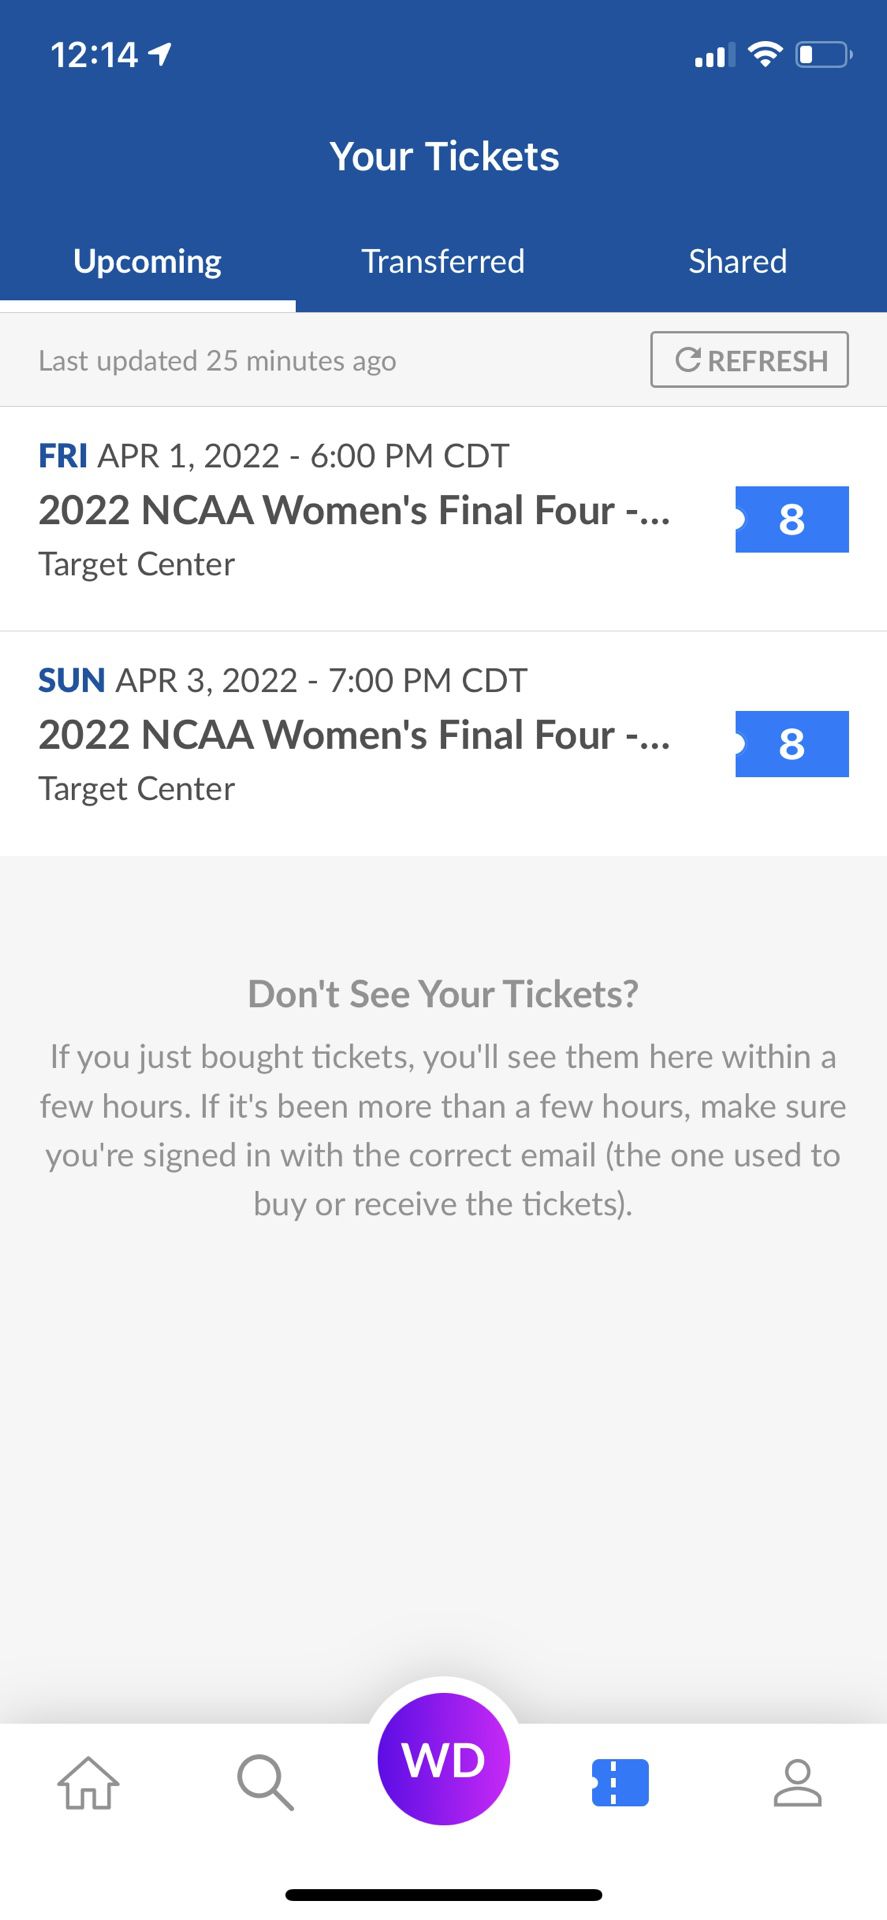 8 Tickets To NCAA Women’s Final Four, 4/1 And 4/3